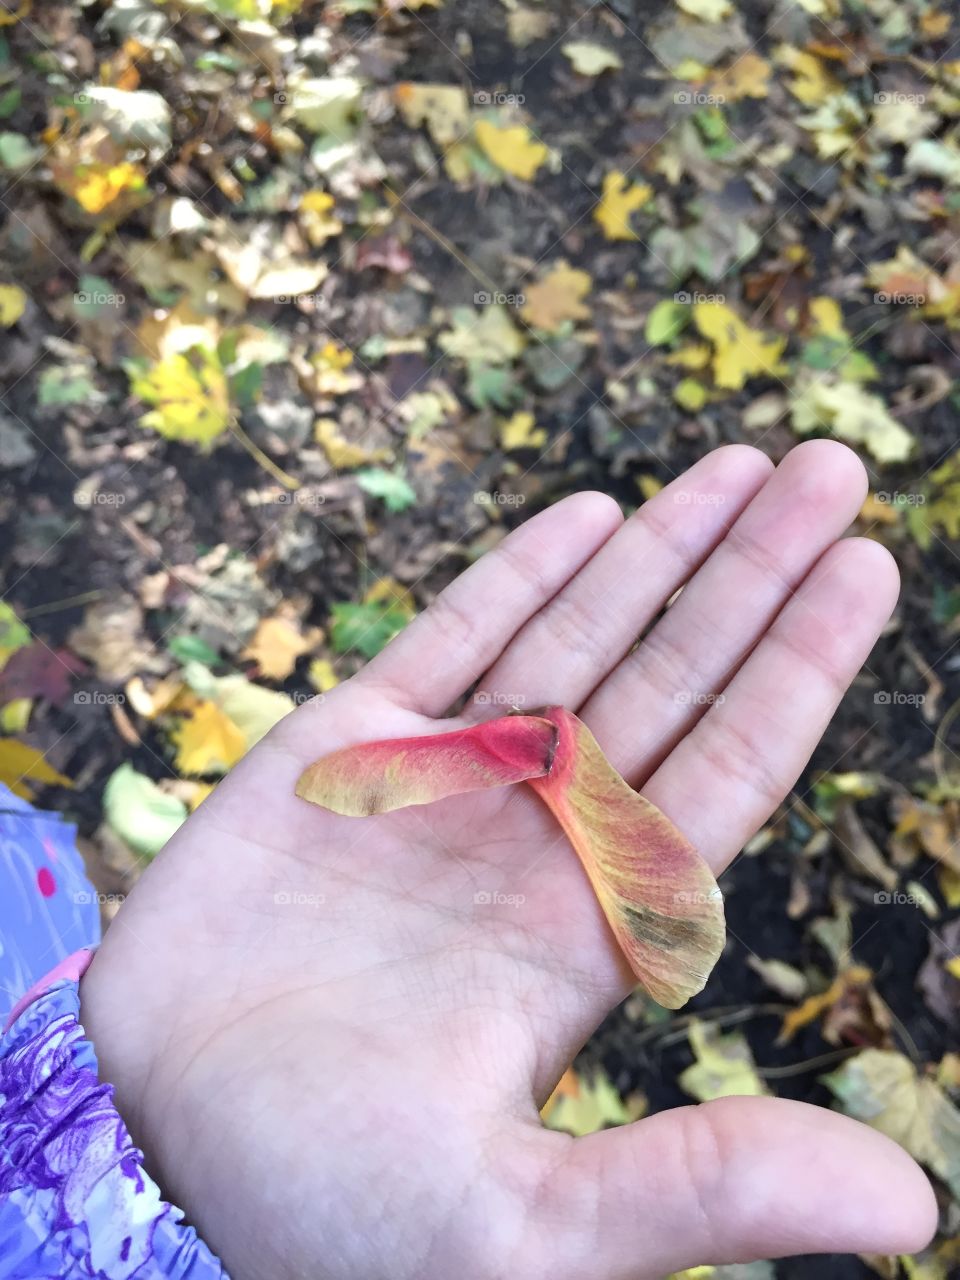 in autumn these maple seeds were ripe. in the spring they will become sprouts